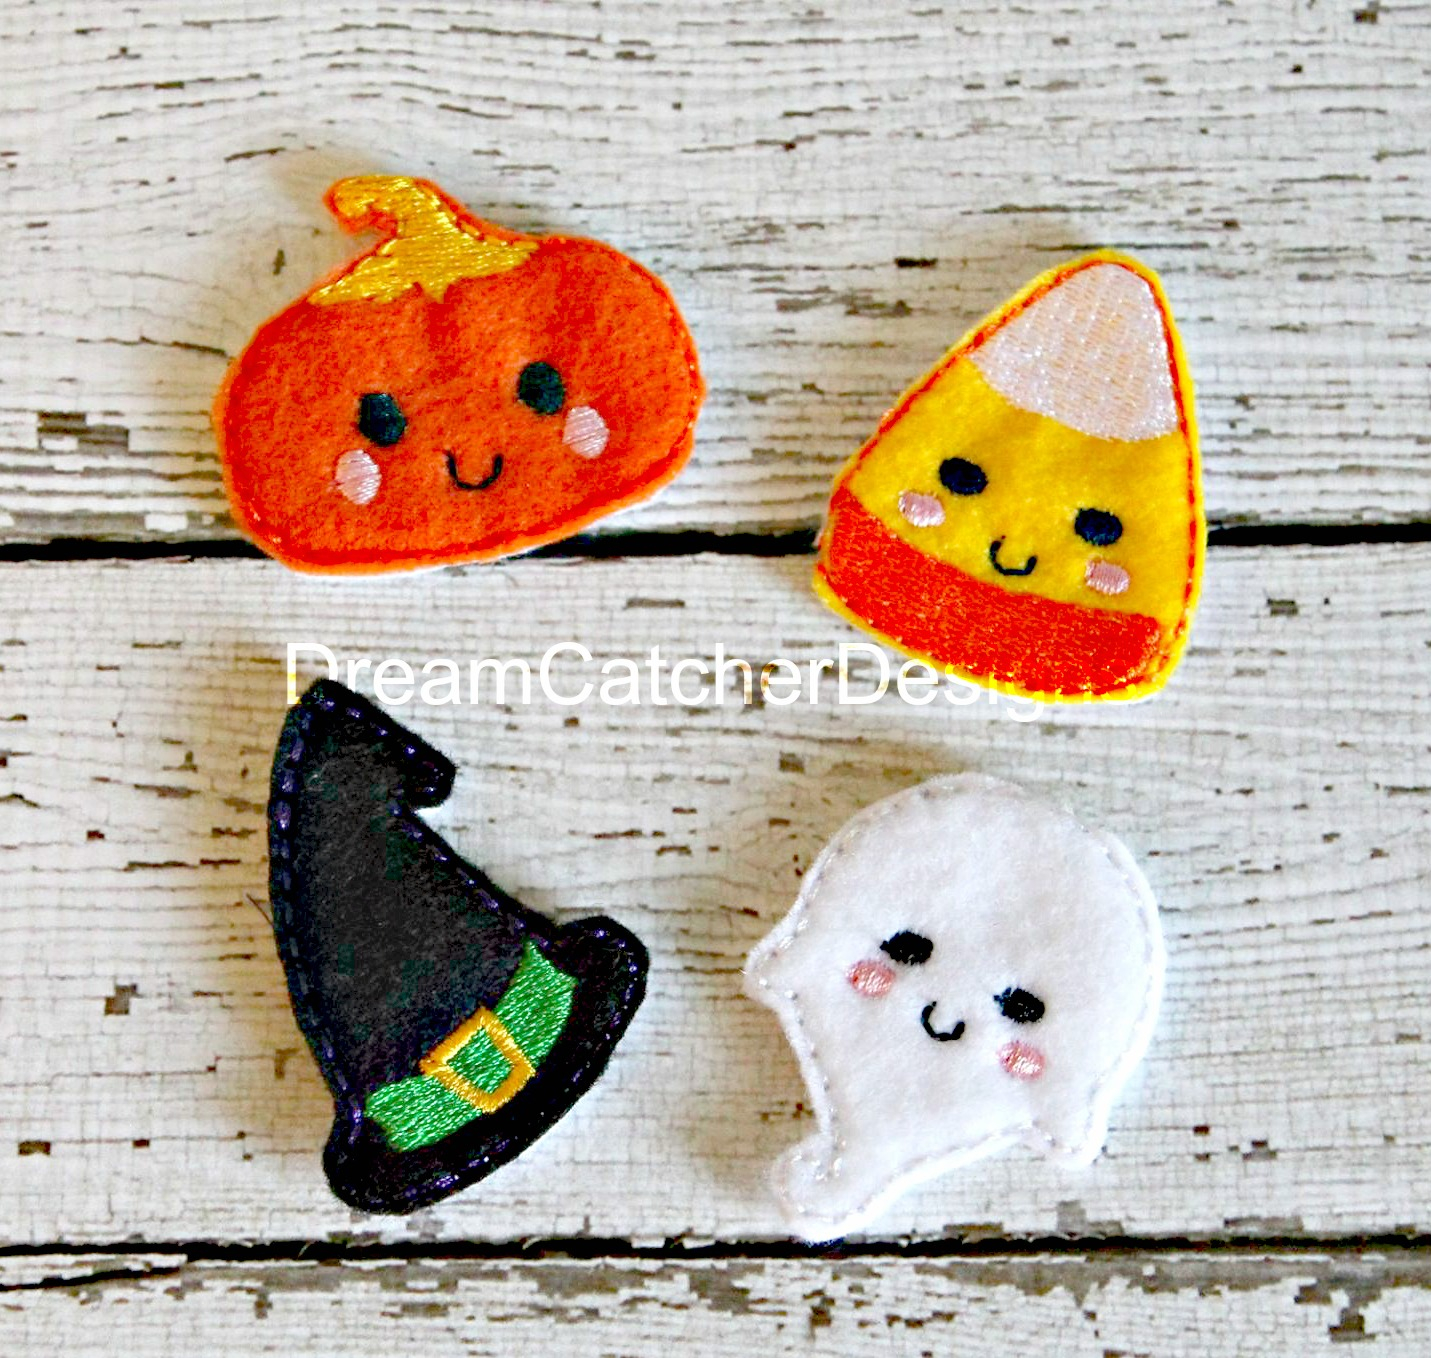 Felt Embroidery Patterns In The Hoop Witch Hat Halloween Feltie Embroidery Design